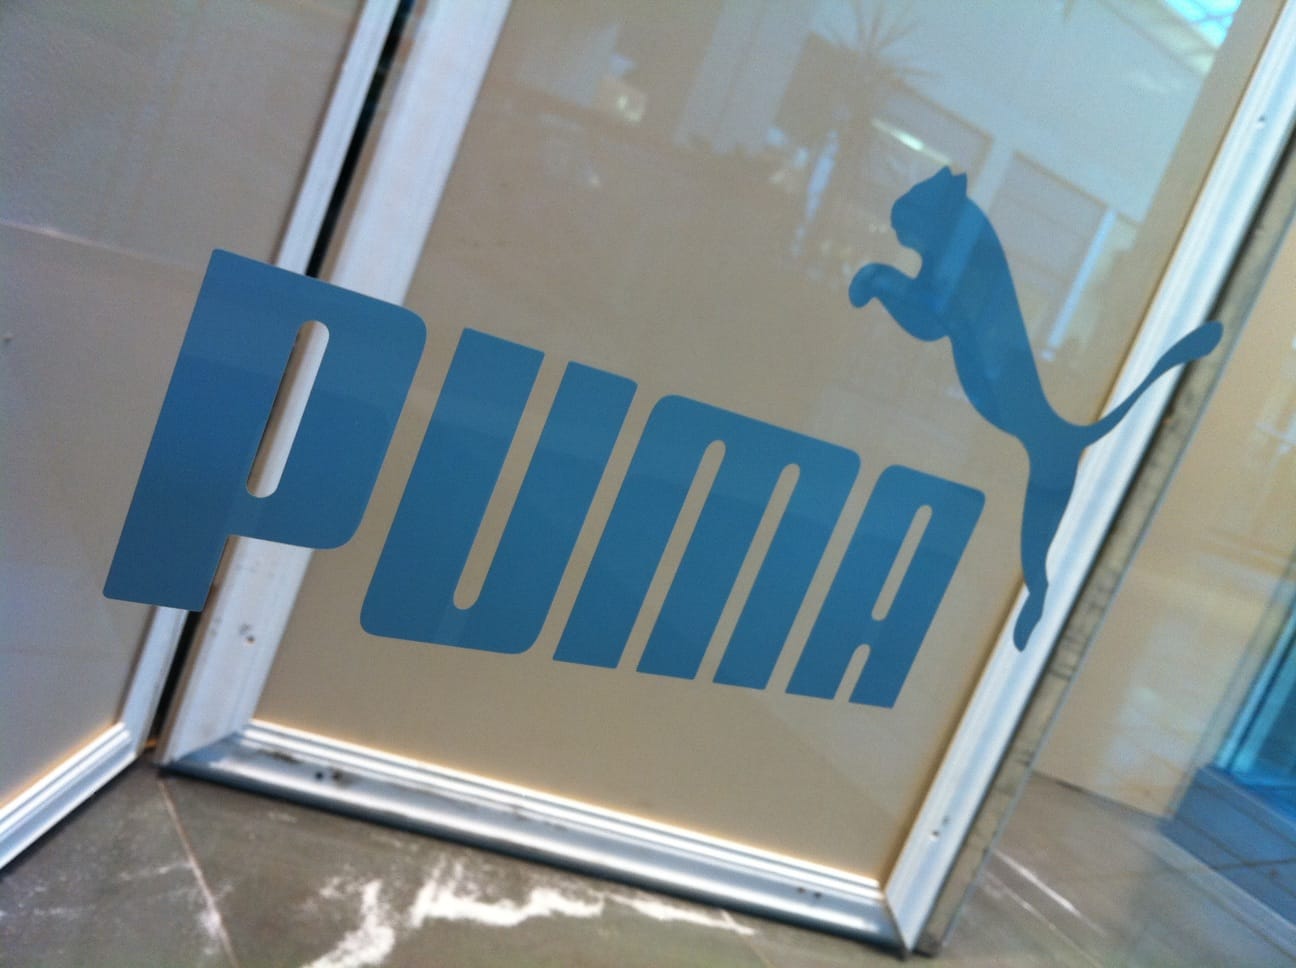 Adidas to replace Puma at Lenox - What 